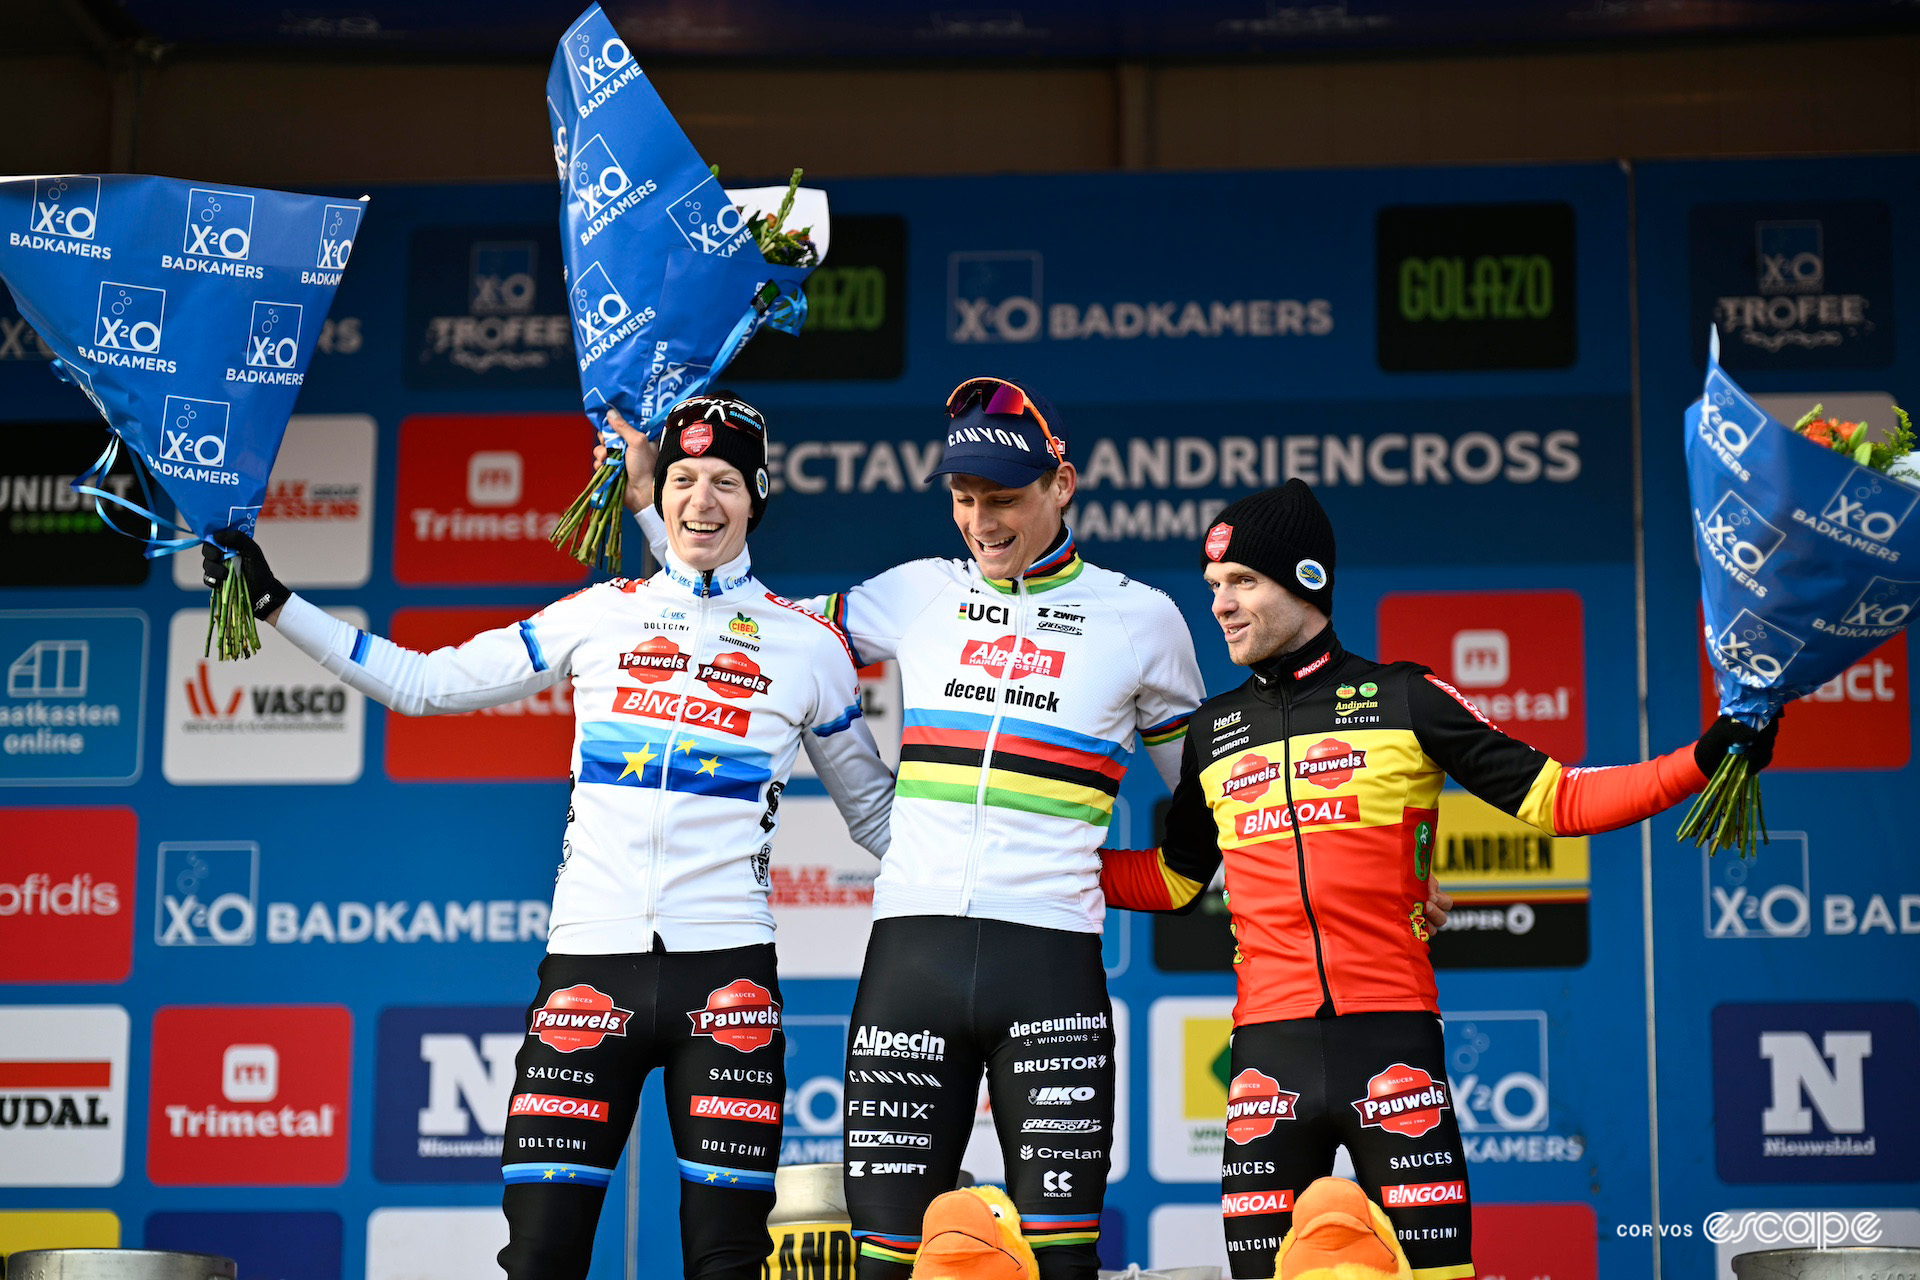 Winner Mathieu van der Poel shares a laugh with second-place Michael Vanthourenhout and and third Eli Iserbyt on the elite men's podium at X2O Trofee Hamme - Flandriencross.